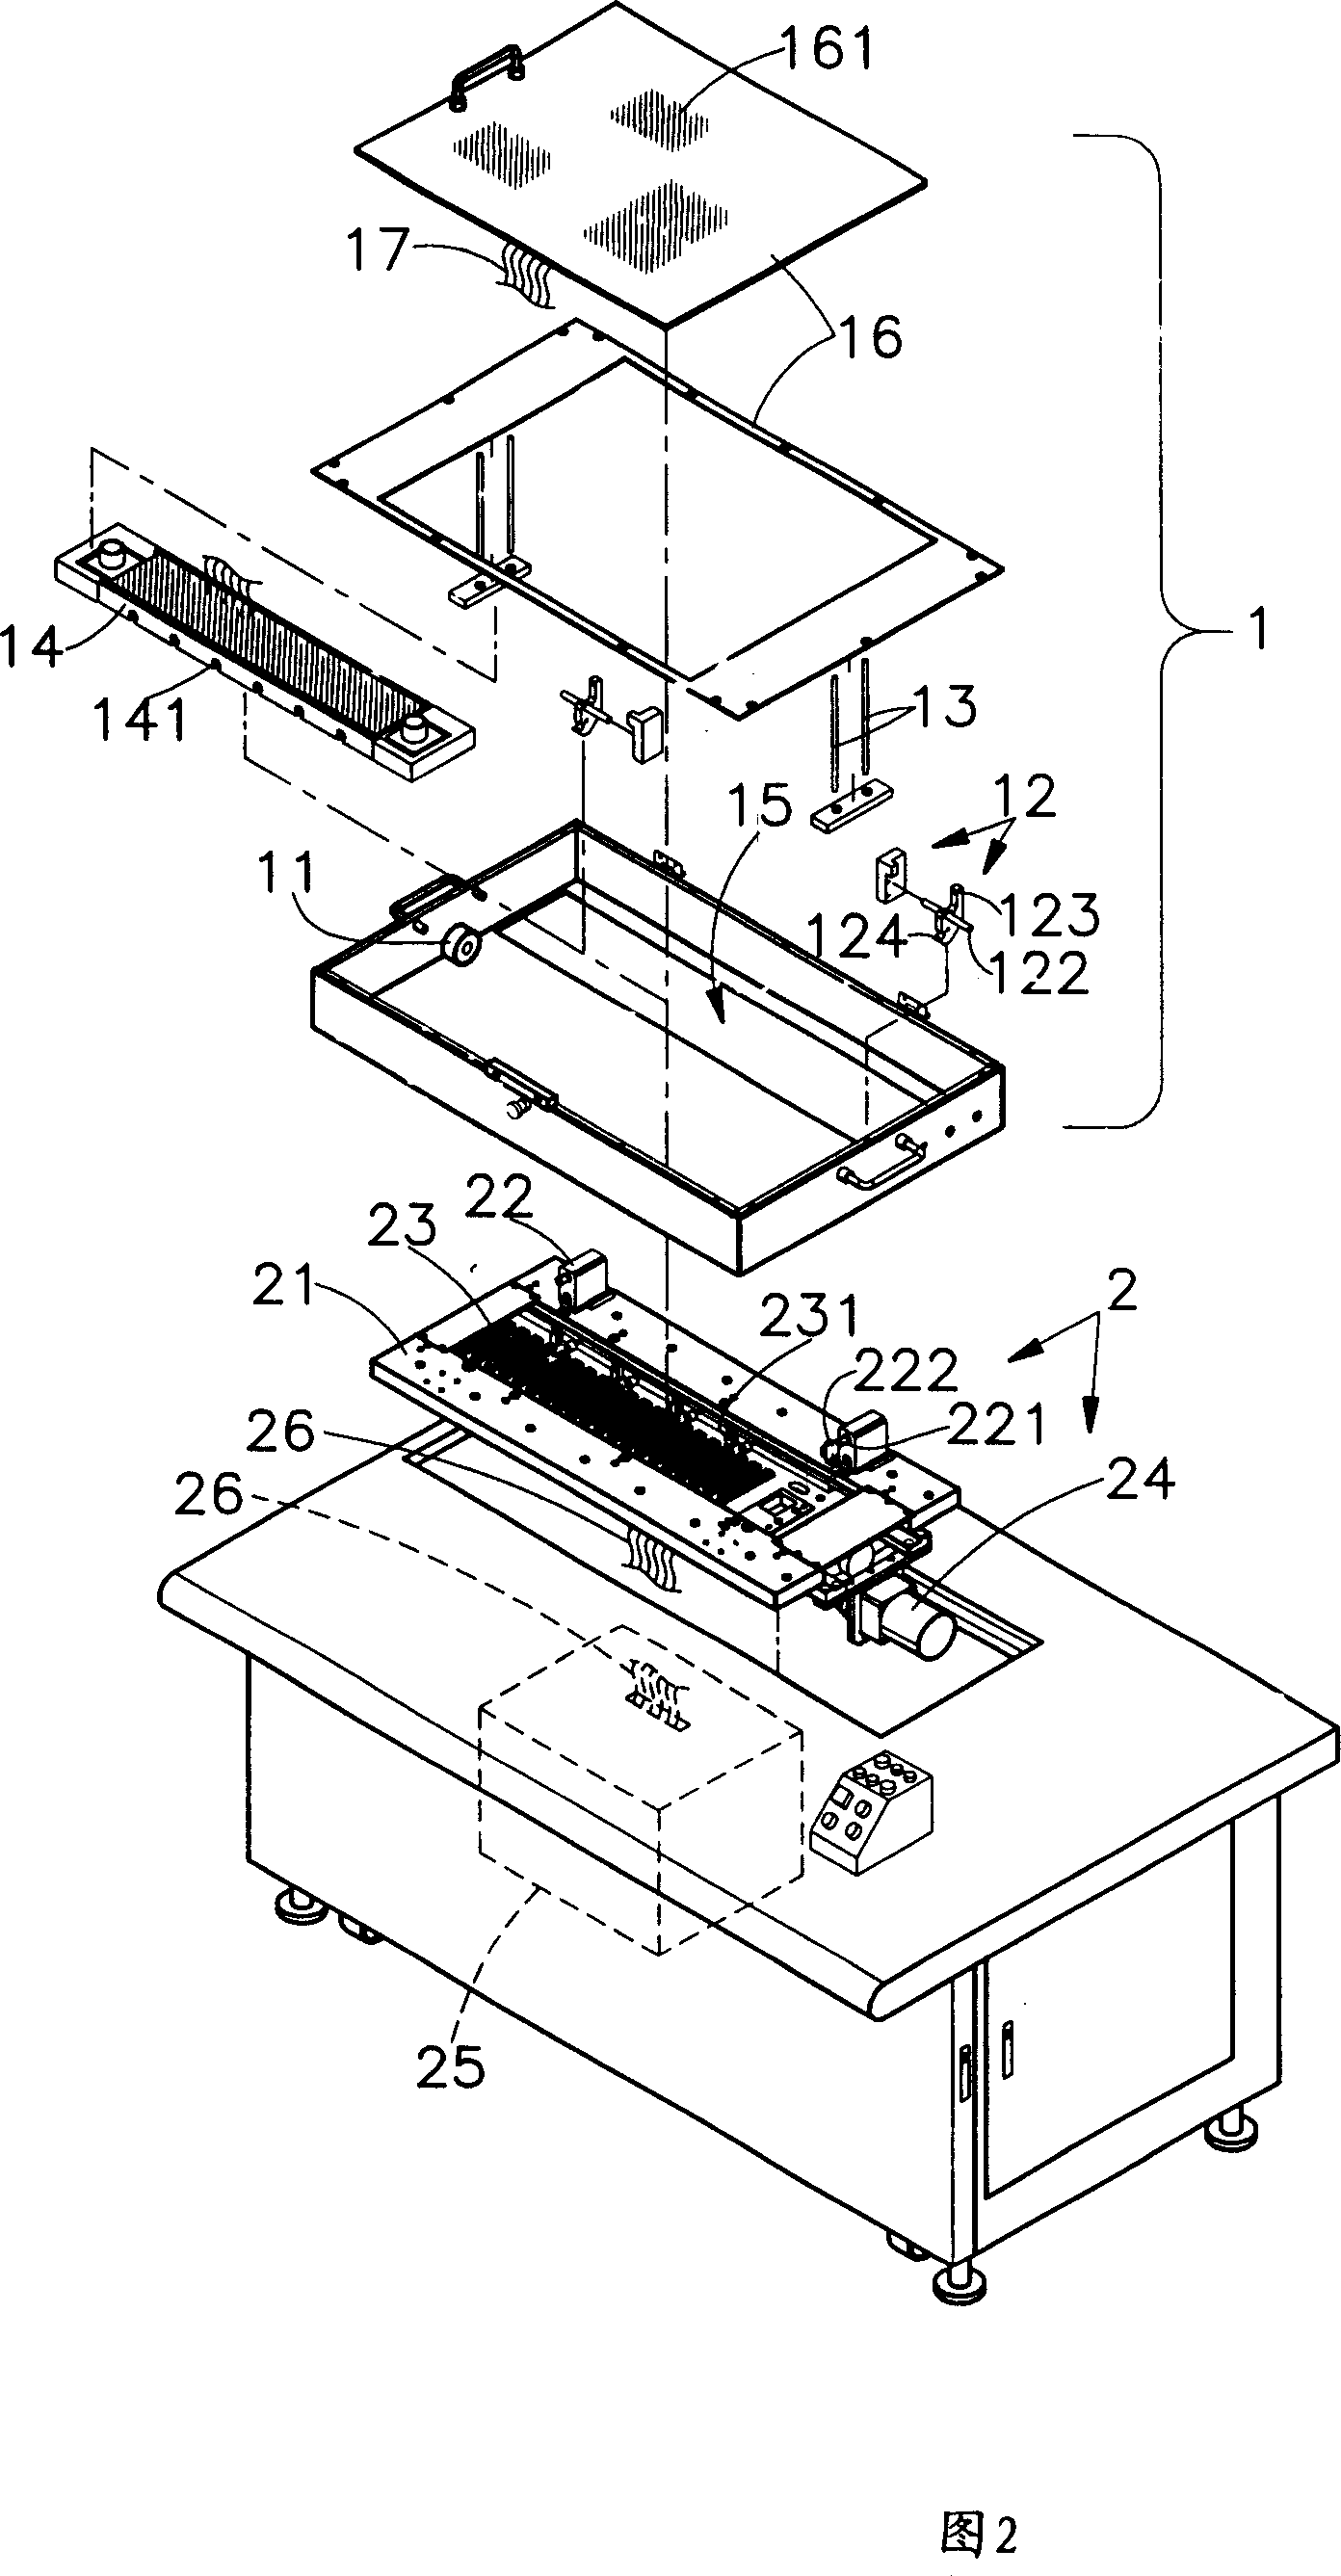 Testing fixture and machine station combination device